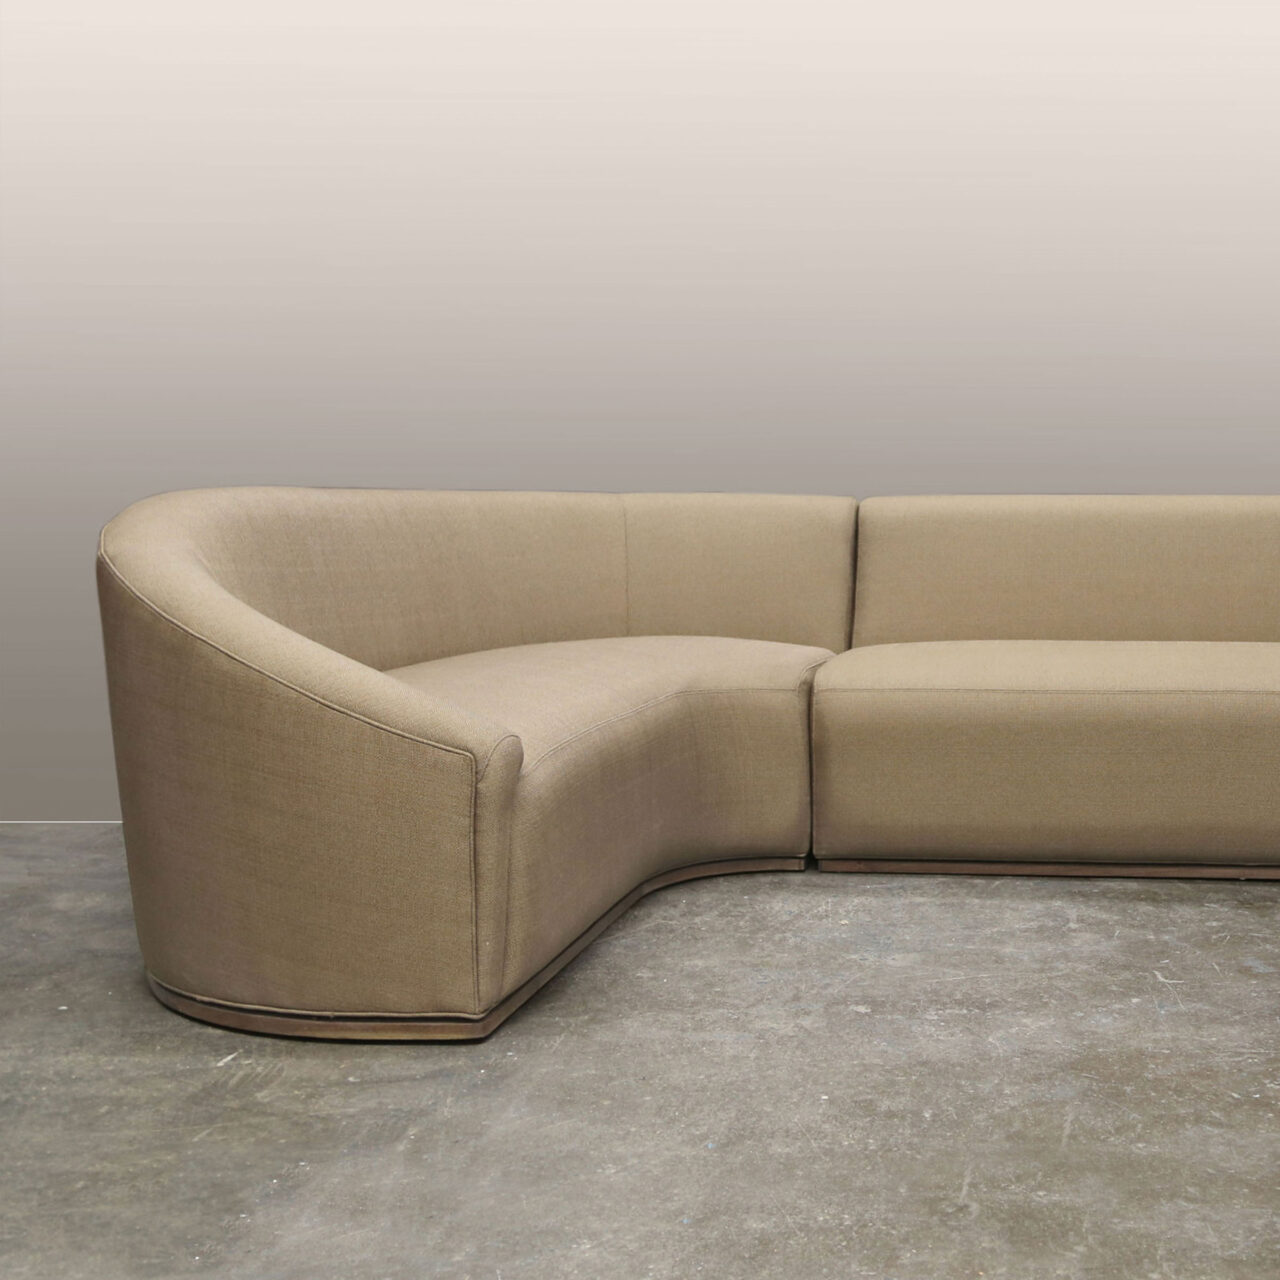 A curvilinear sectional sofa, Baashe, from SENTIENT Furniture with a beige upholstery, designed to provide a seamless and cozy seating area that contours to a room's corner, set against a simple backdrop.